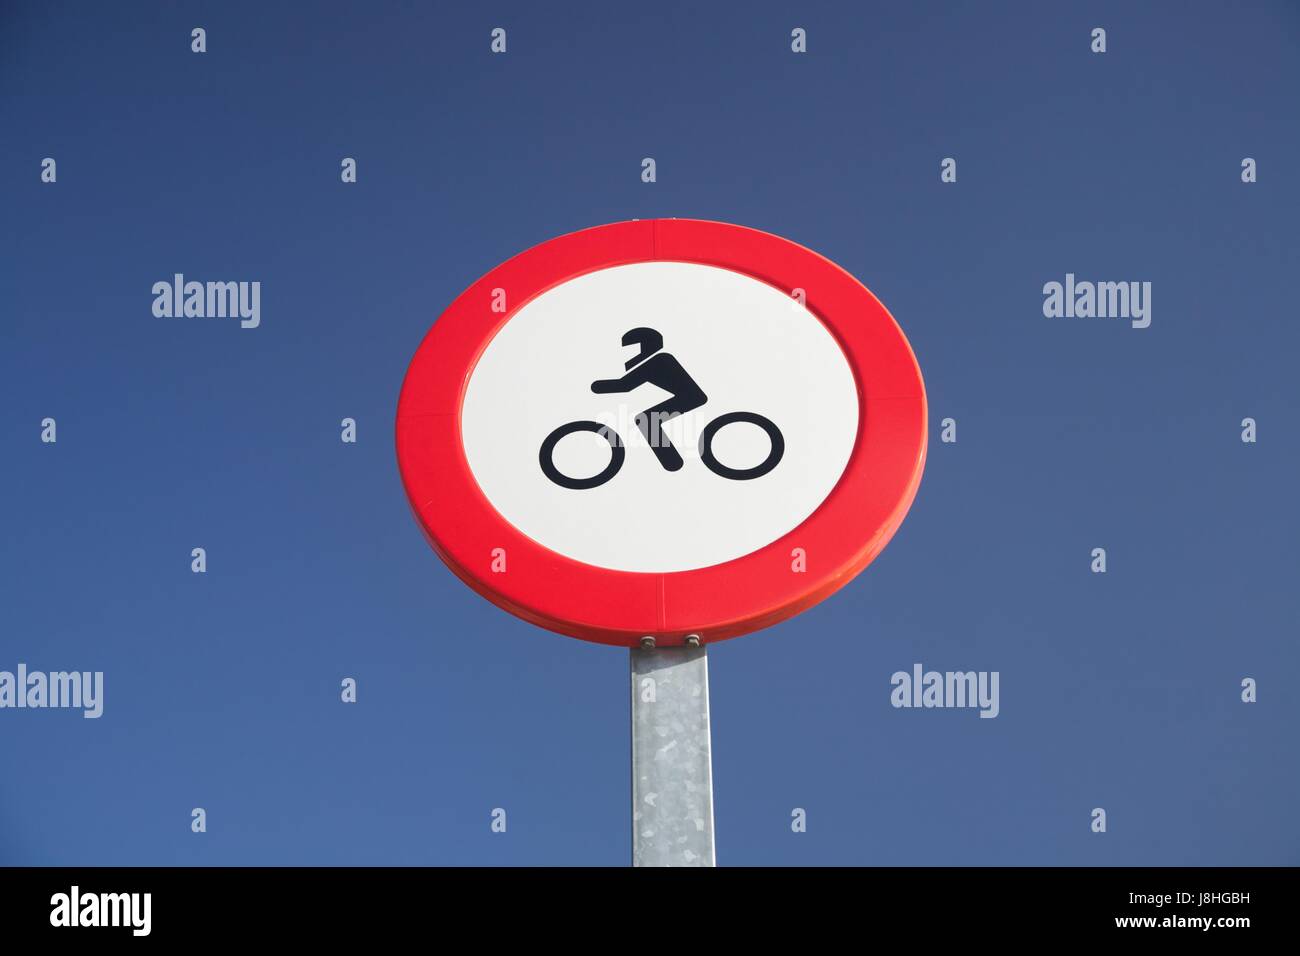 sign, signal, danger, traffic, transportation, transport, icon, red, sign, Stock Photo